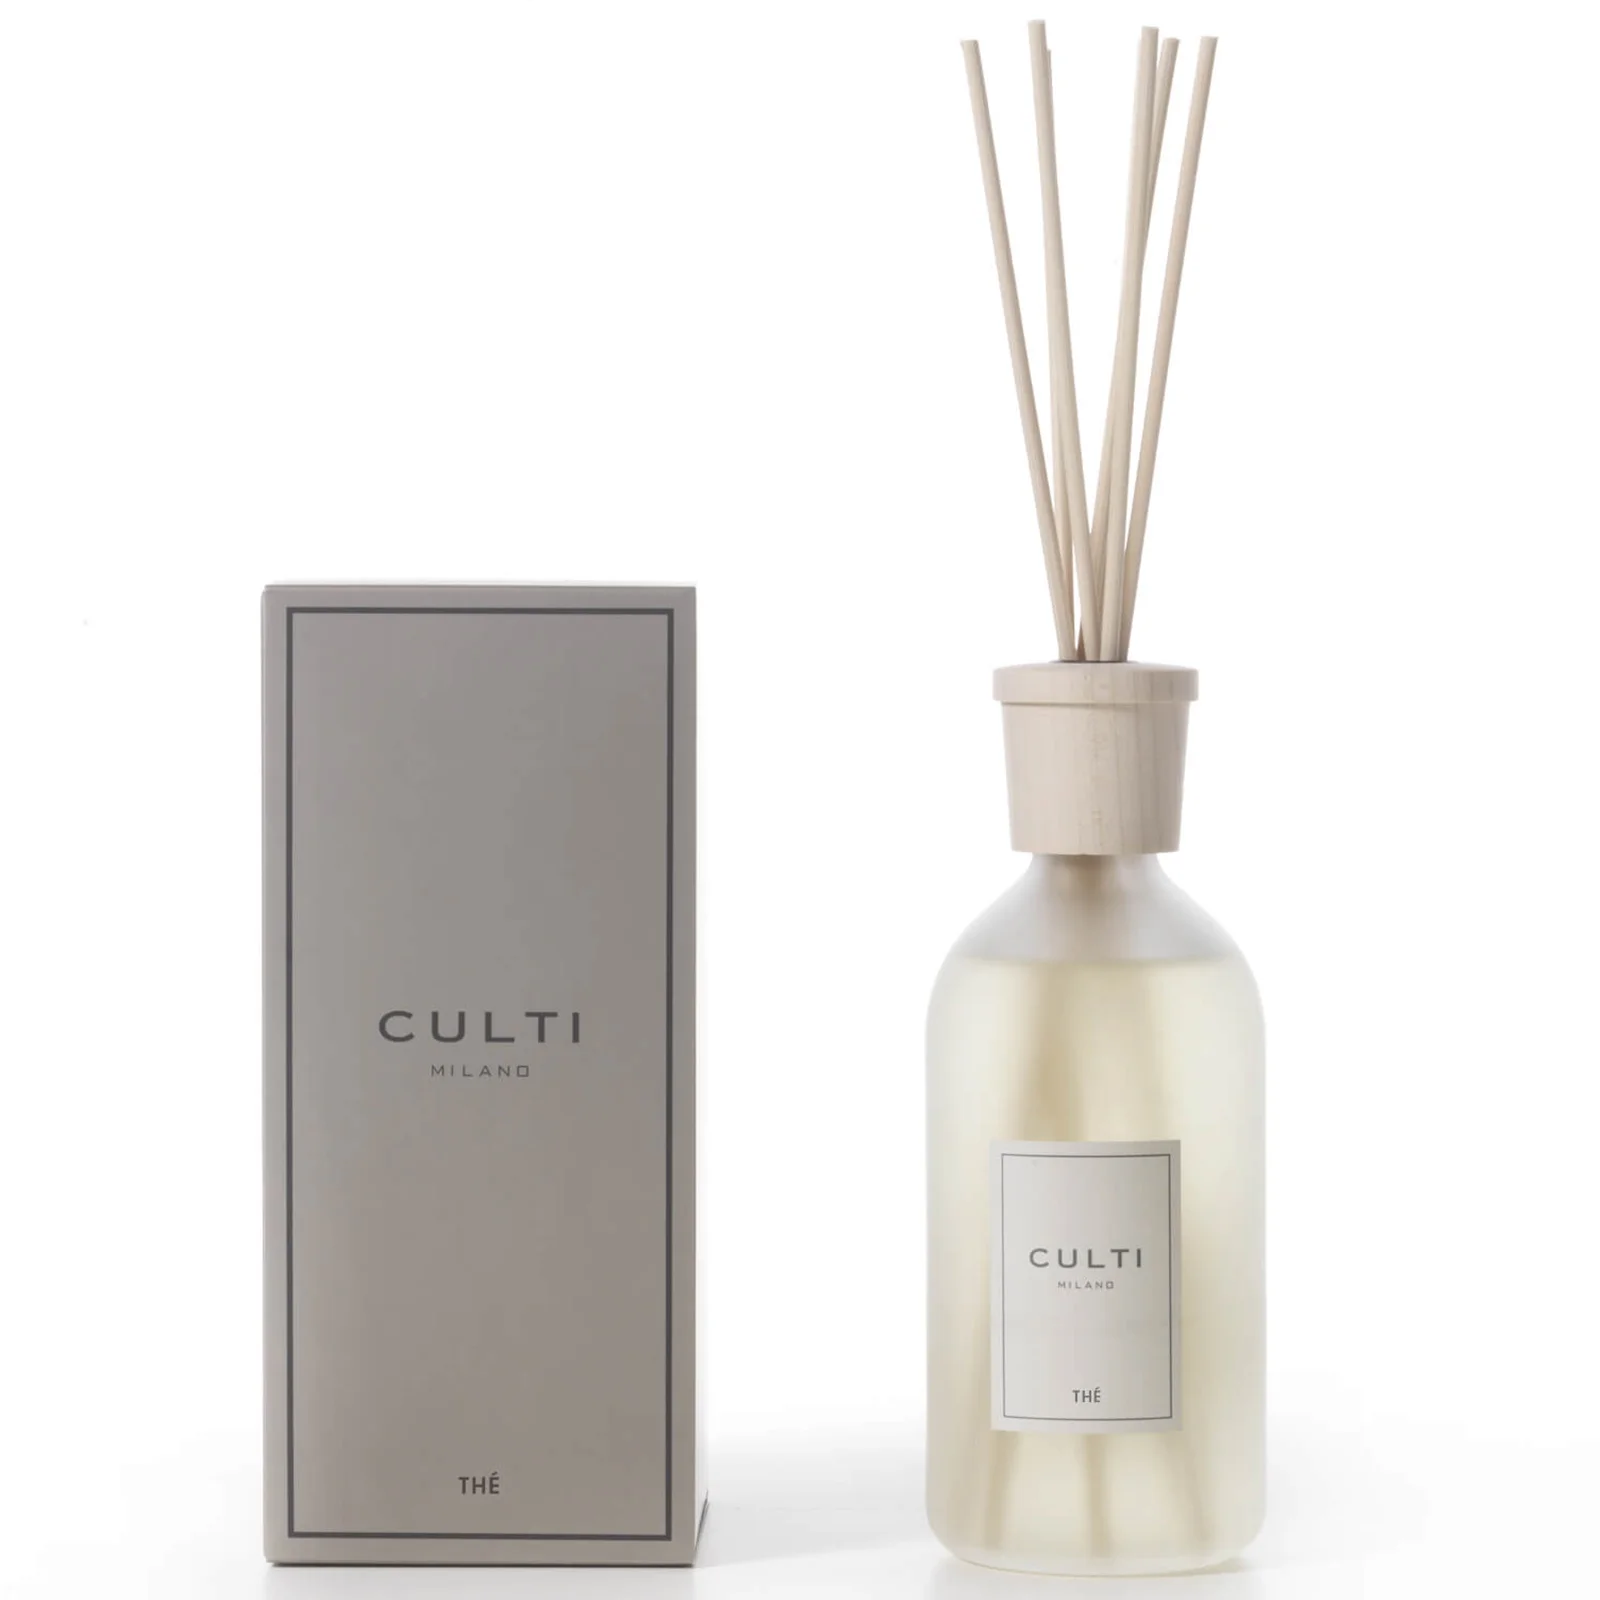 Culti The Stile Classic Reed Diffuser - 500ml Image 1